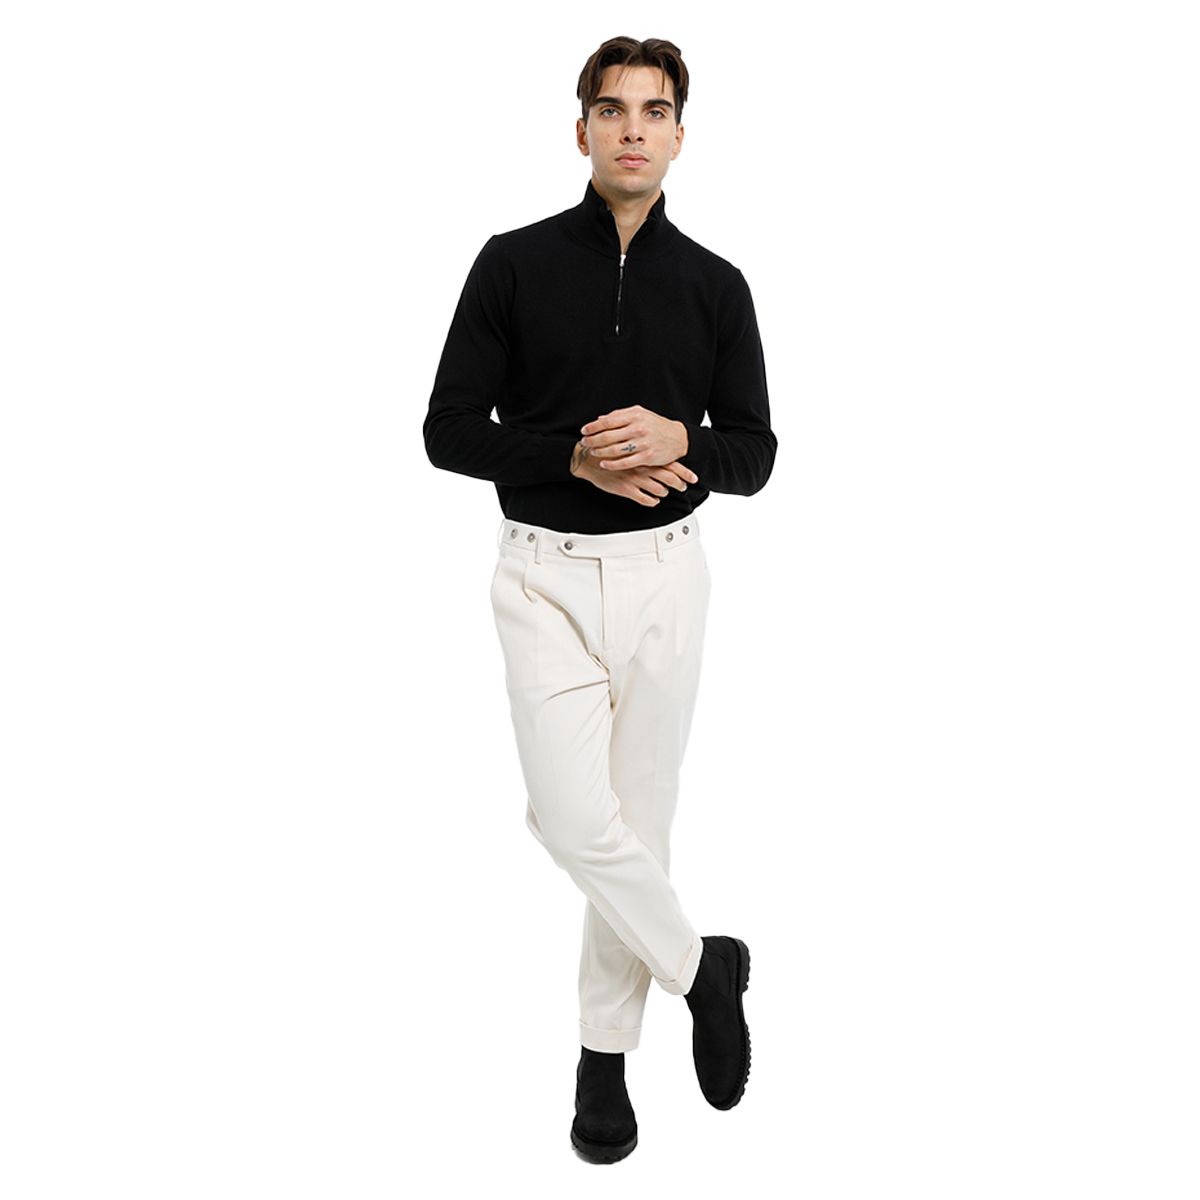 Barber White Trousers